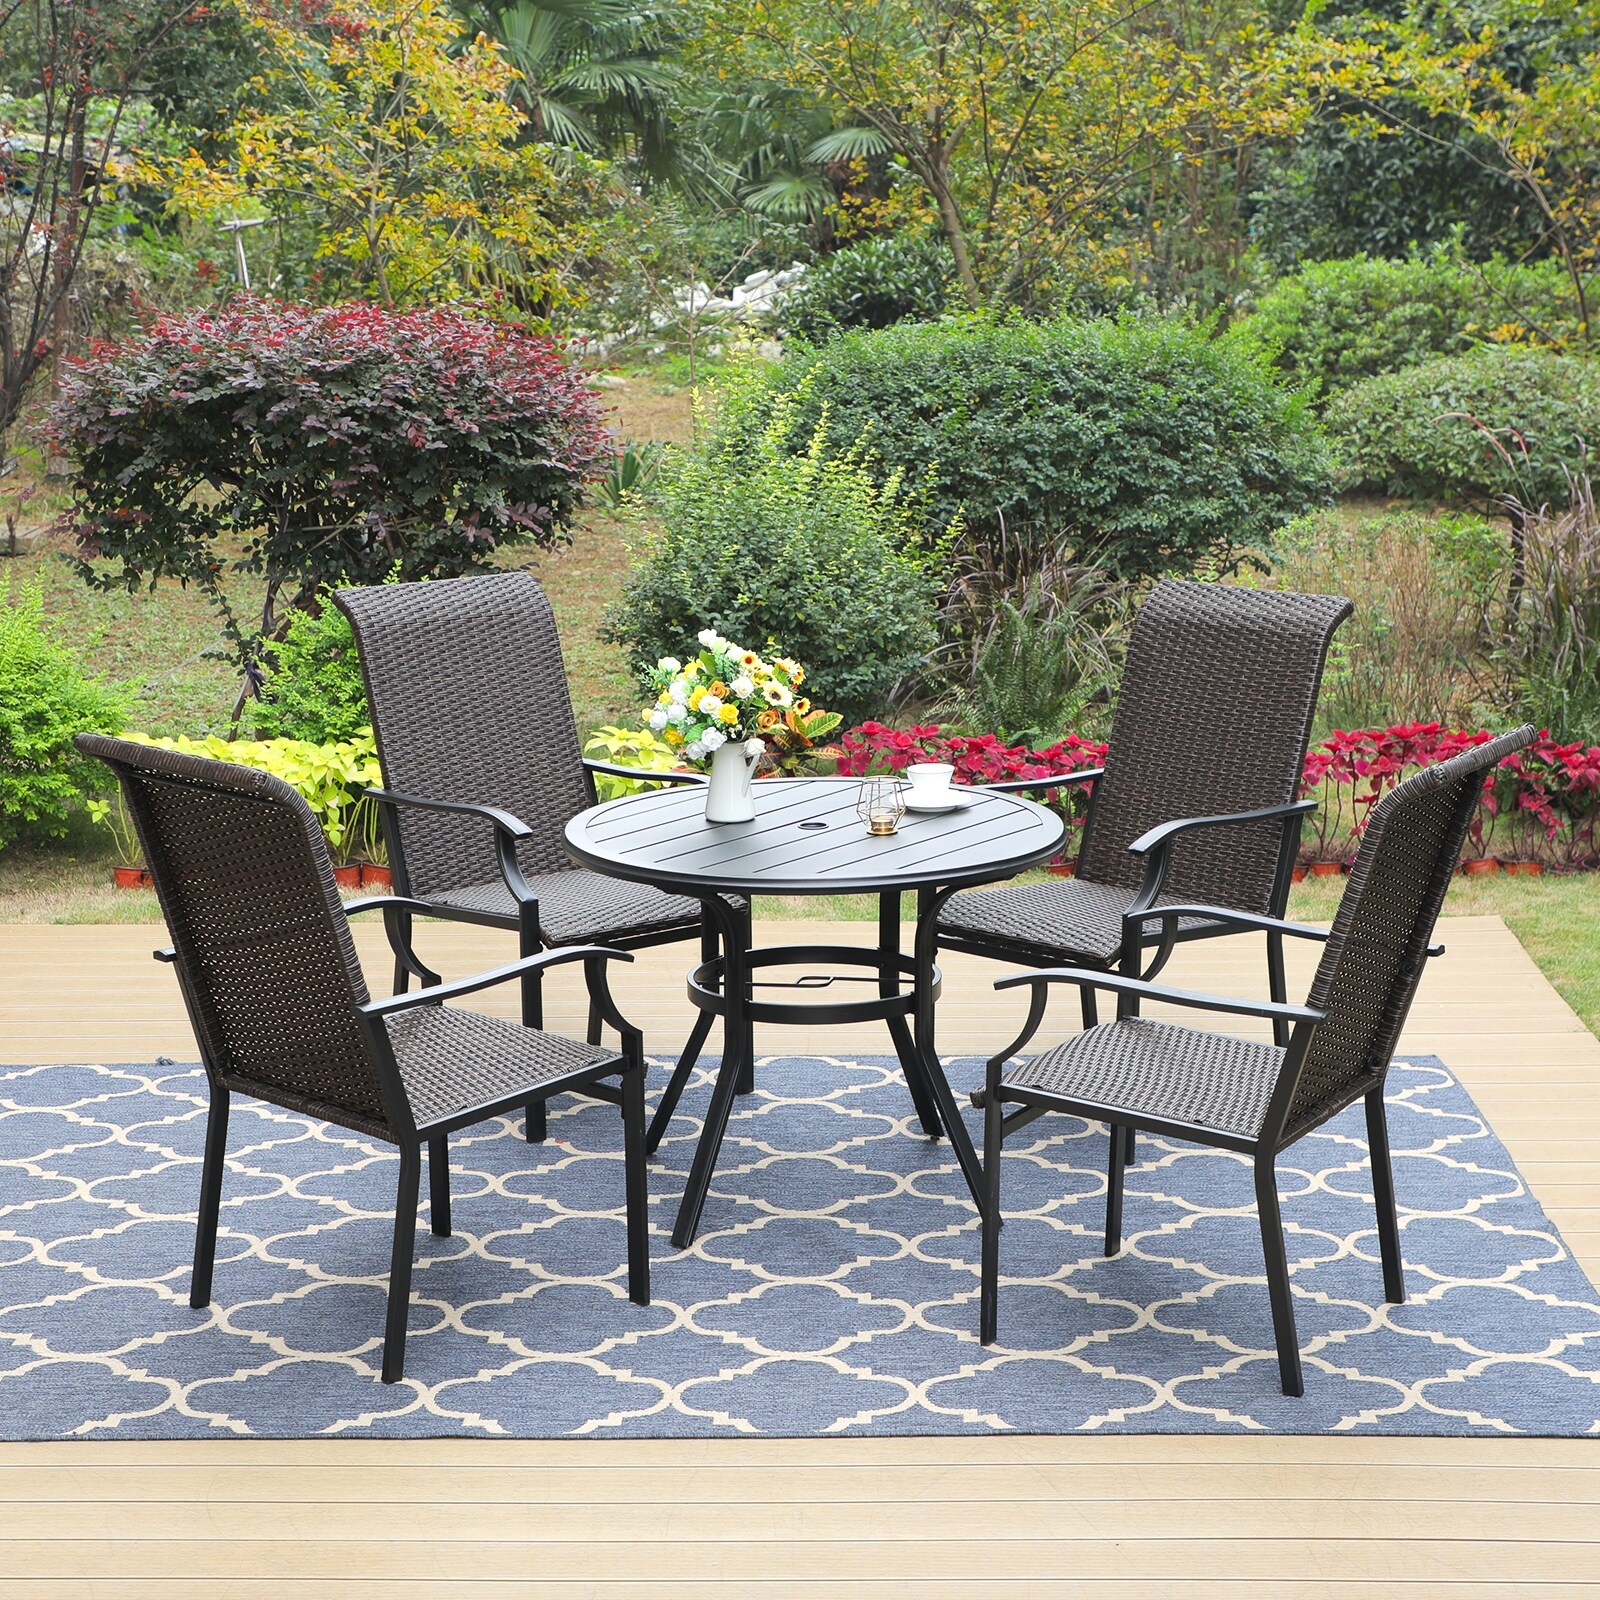 Sophia and William Outdoor Patio 5-piece Dining Set  1 Metal Table With An Umbrella Hole And 4 Pe Rattan Chairs